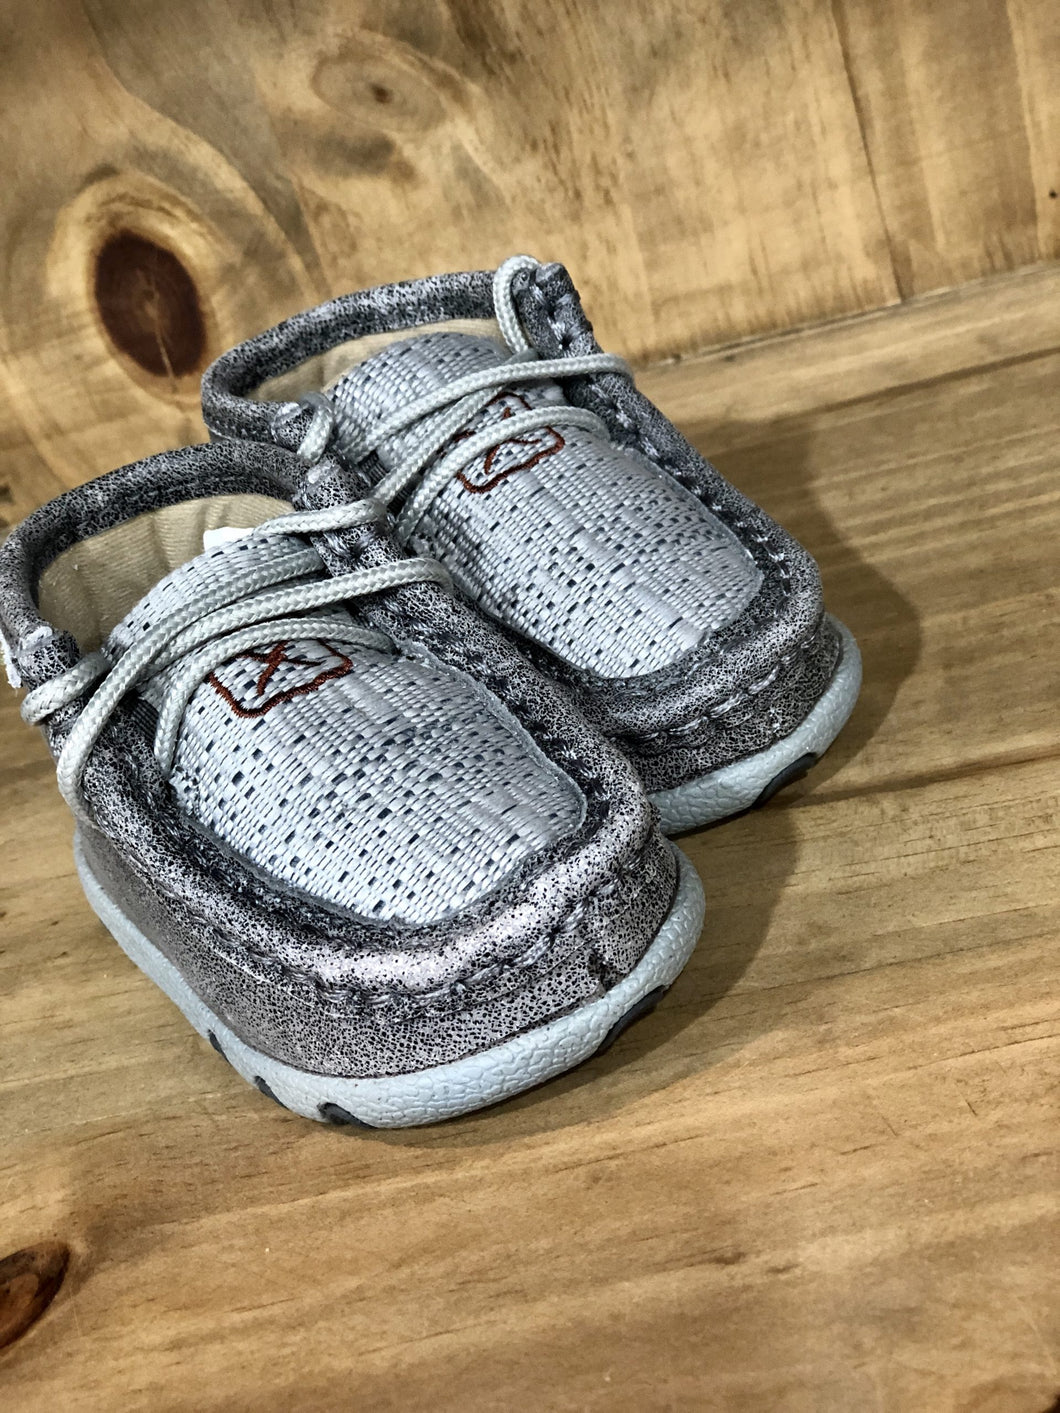 Twisted X Toddler Grey Moc